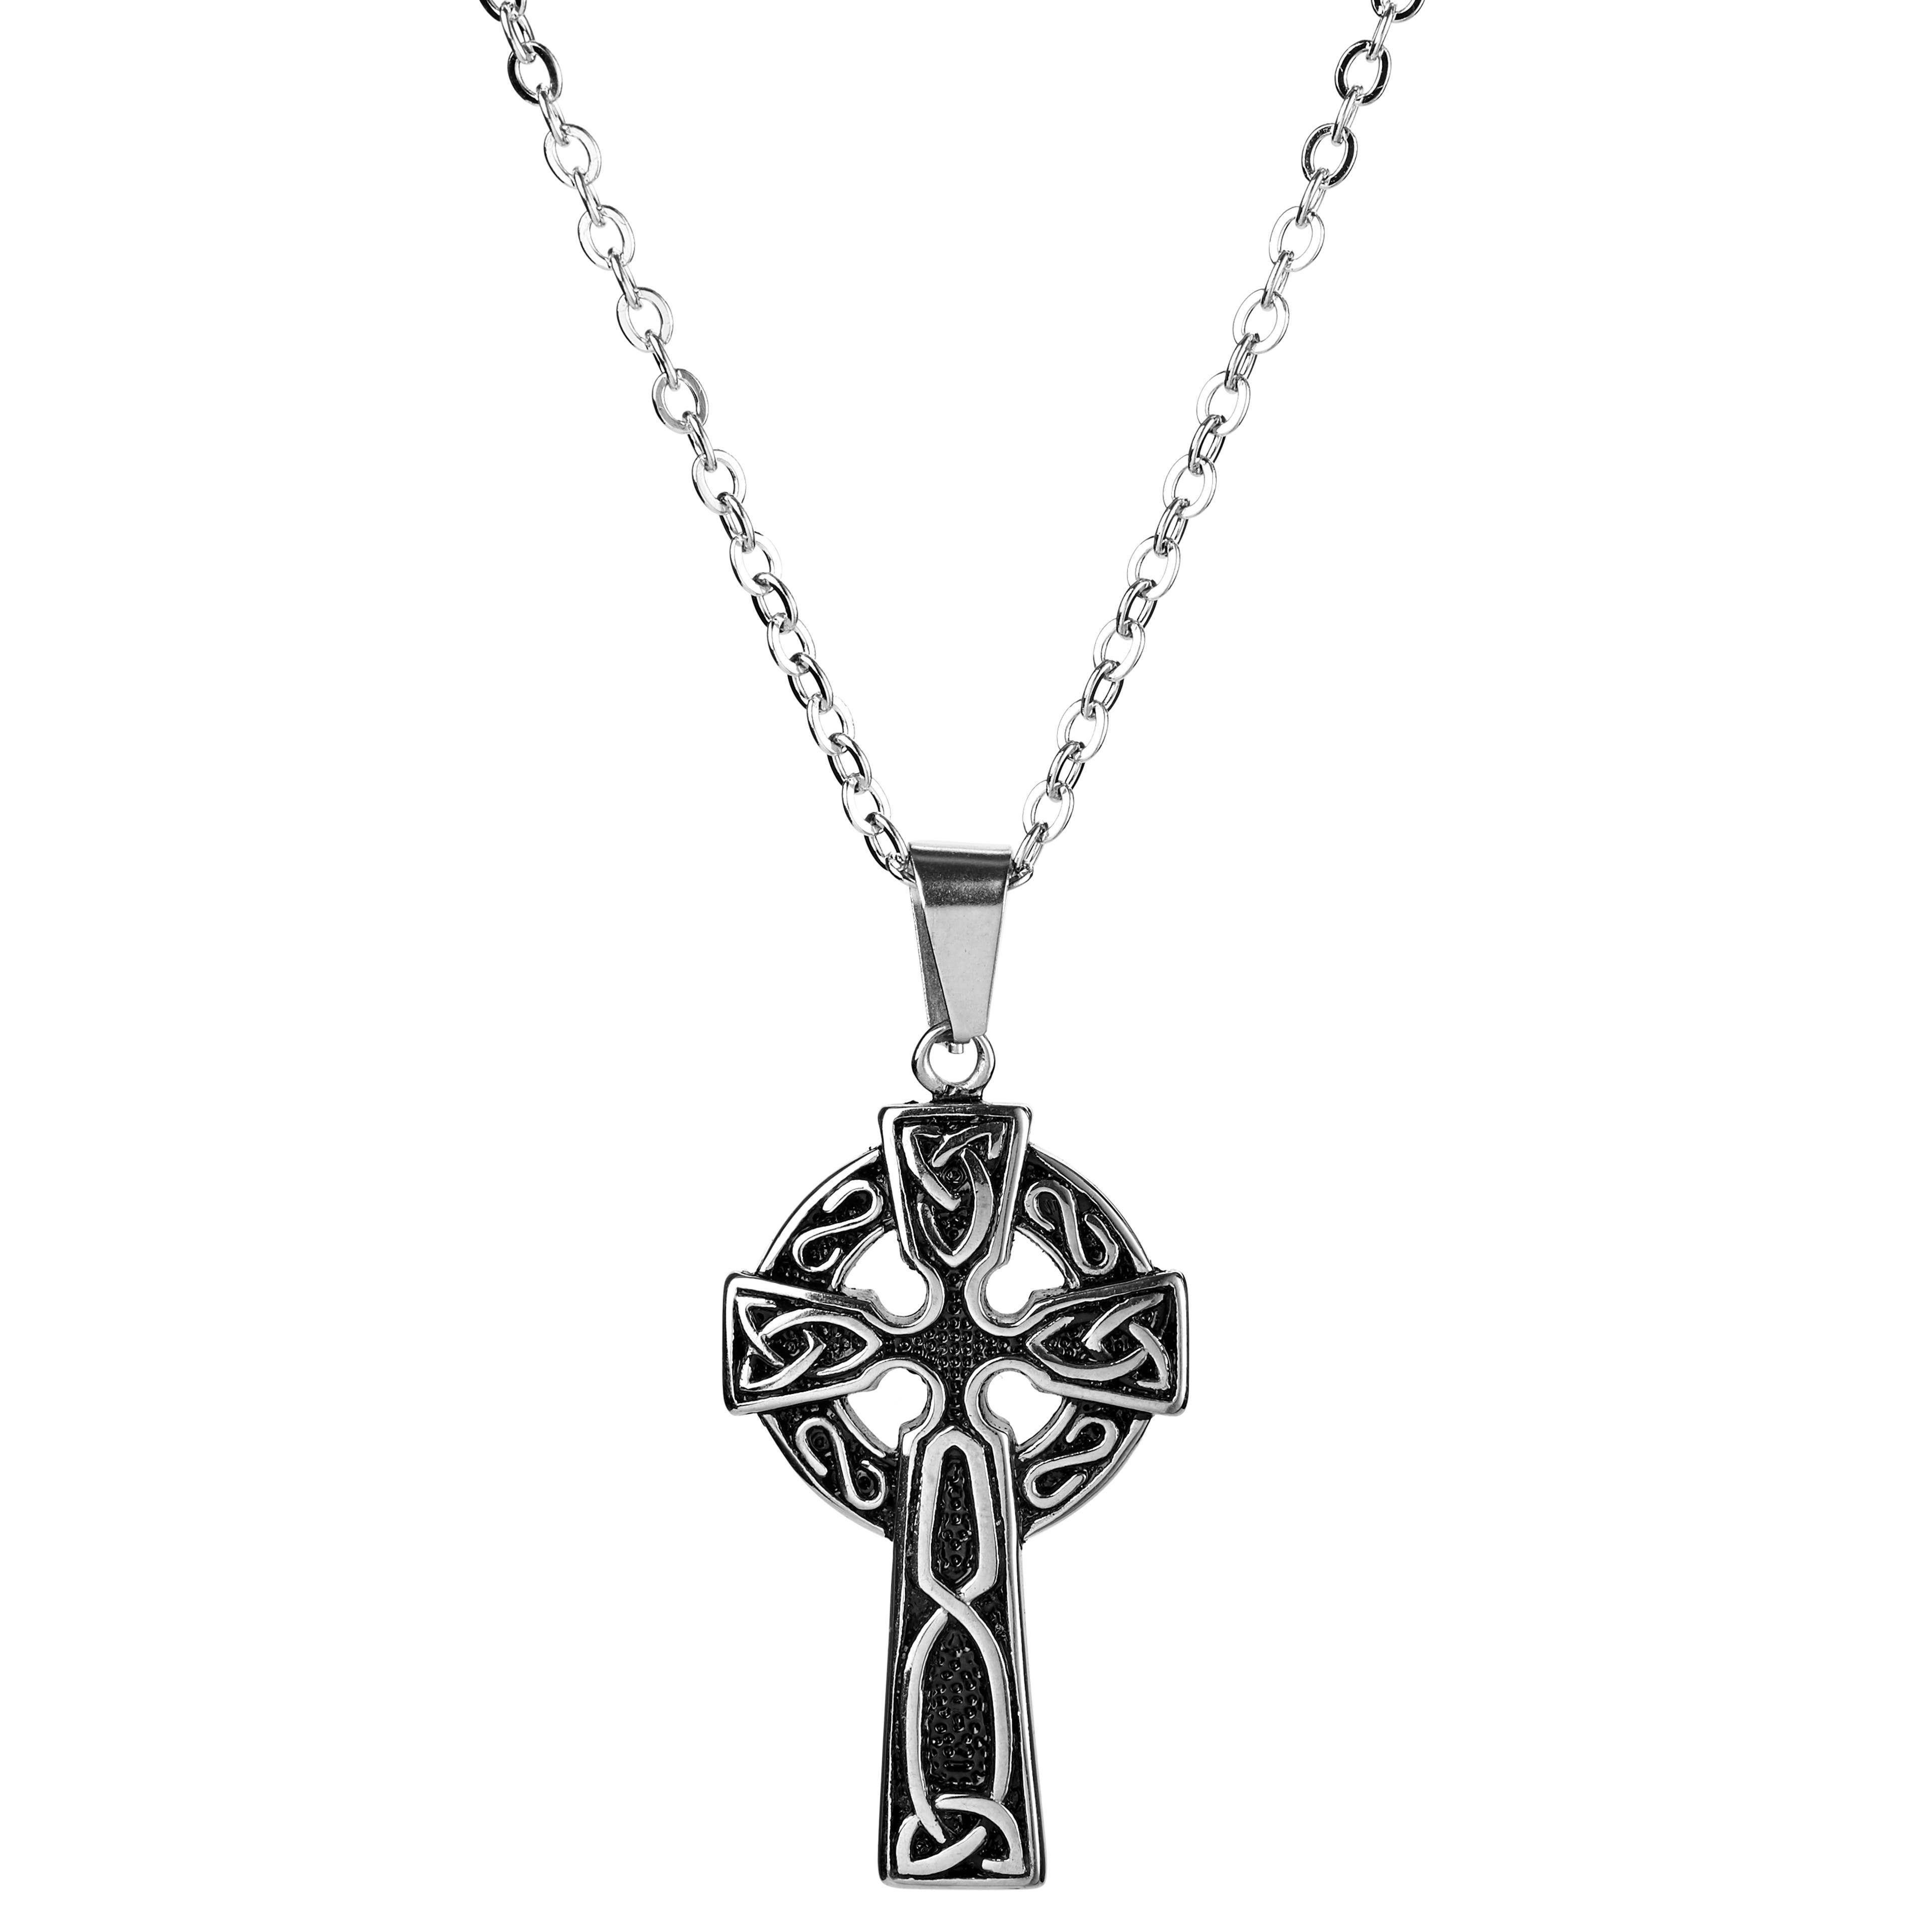 Silver-Tone Stainless Steel Celtic Cross Cable Chain Necklace